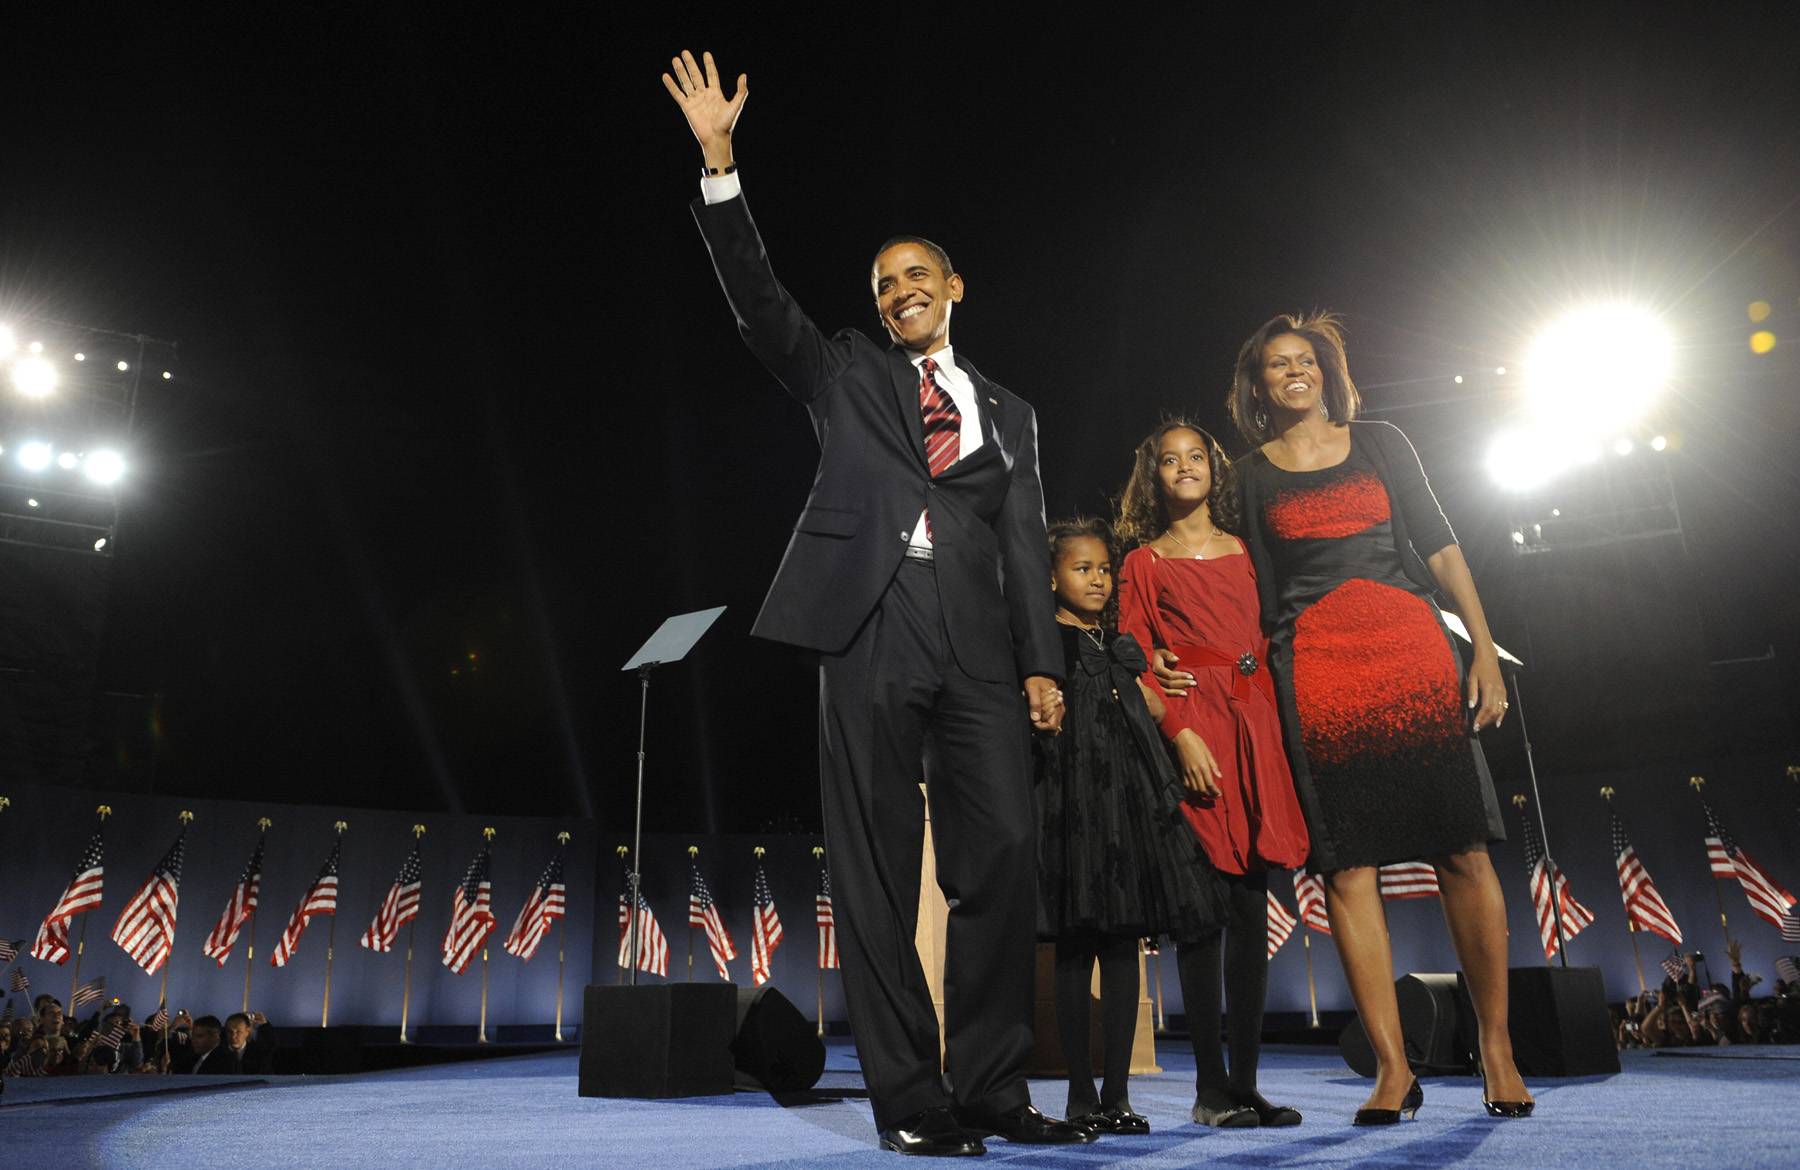 Barack Obama elected first Black president of the United States 